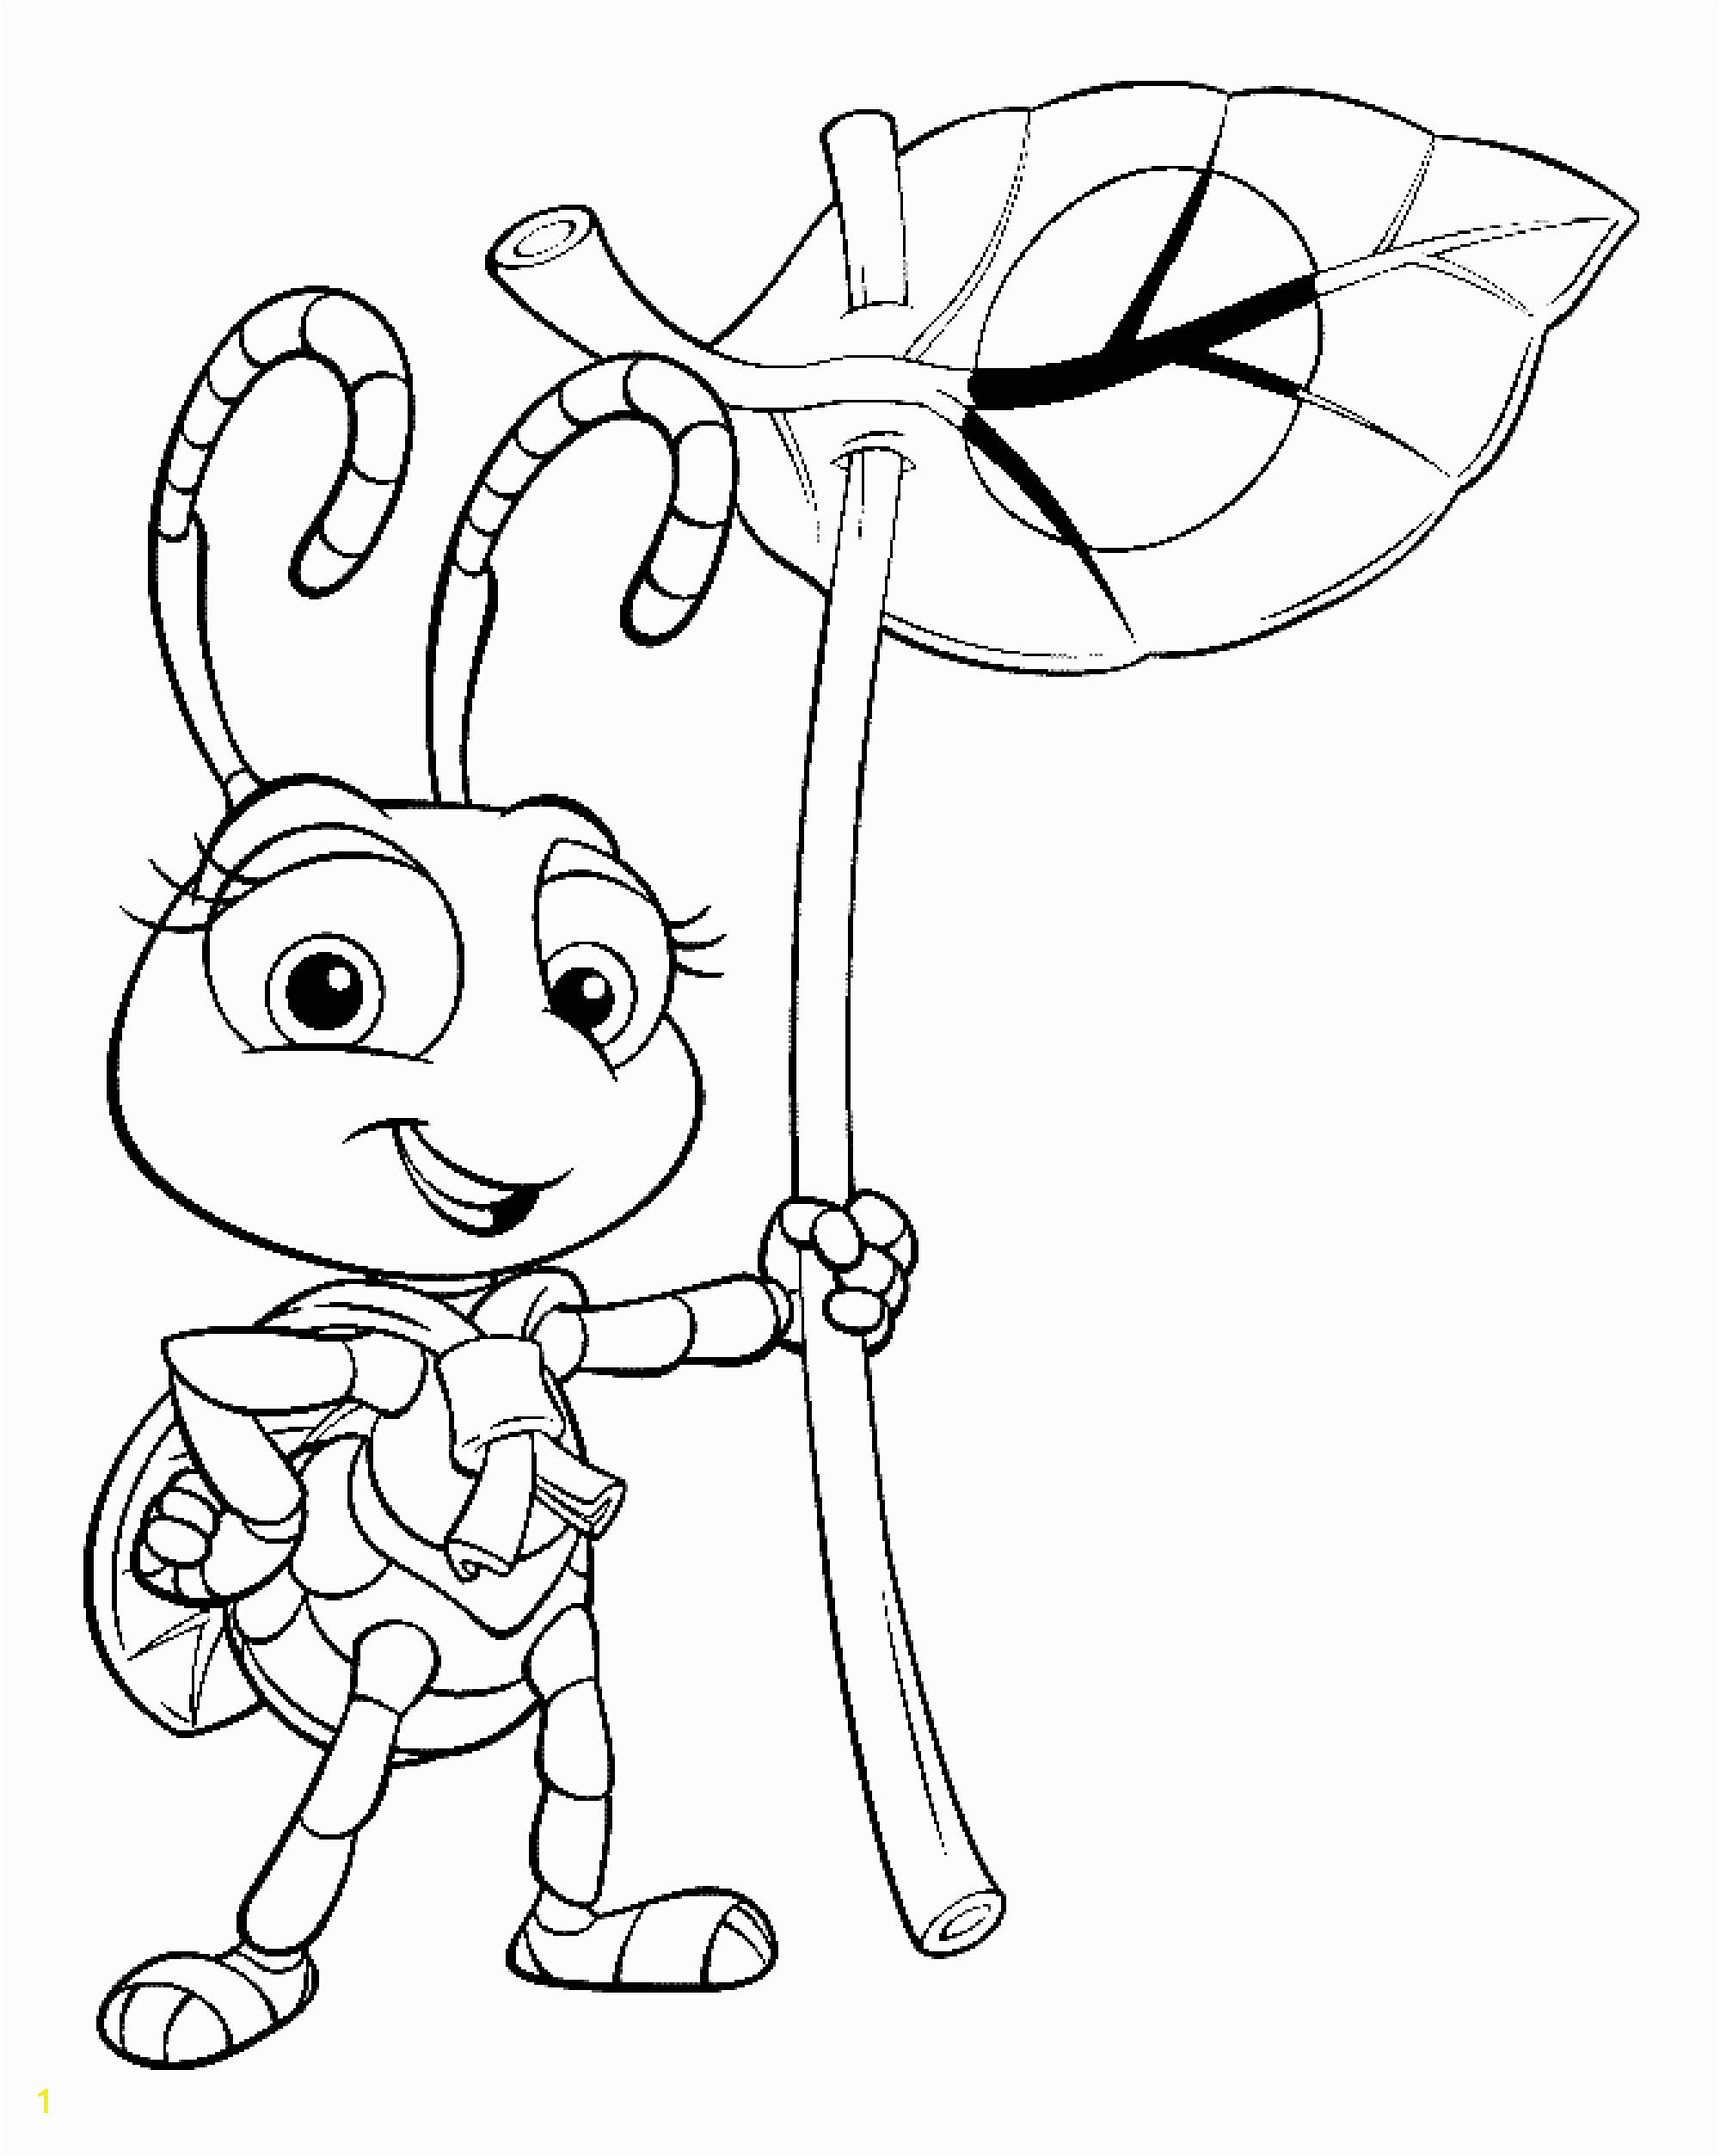 image=a bug s life coloring pages for children a bugs life 6265 2